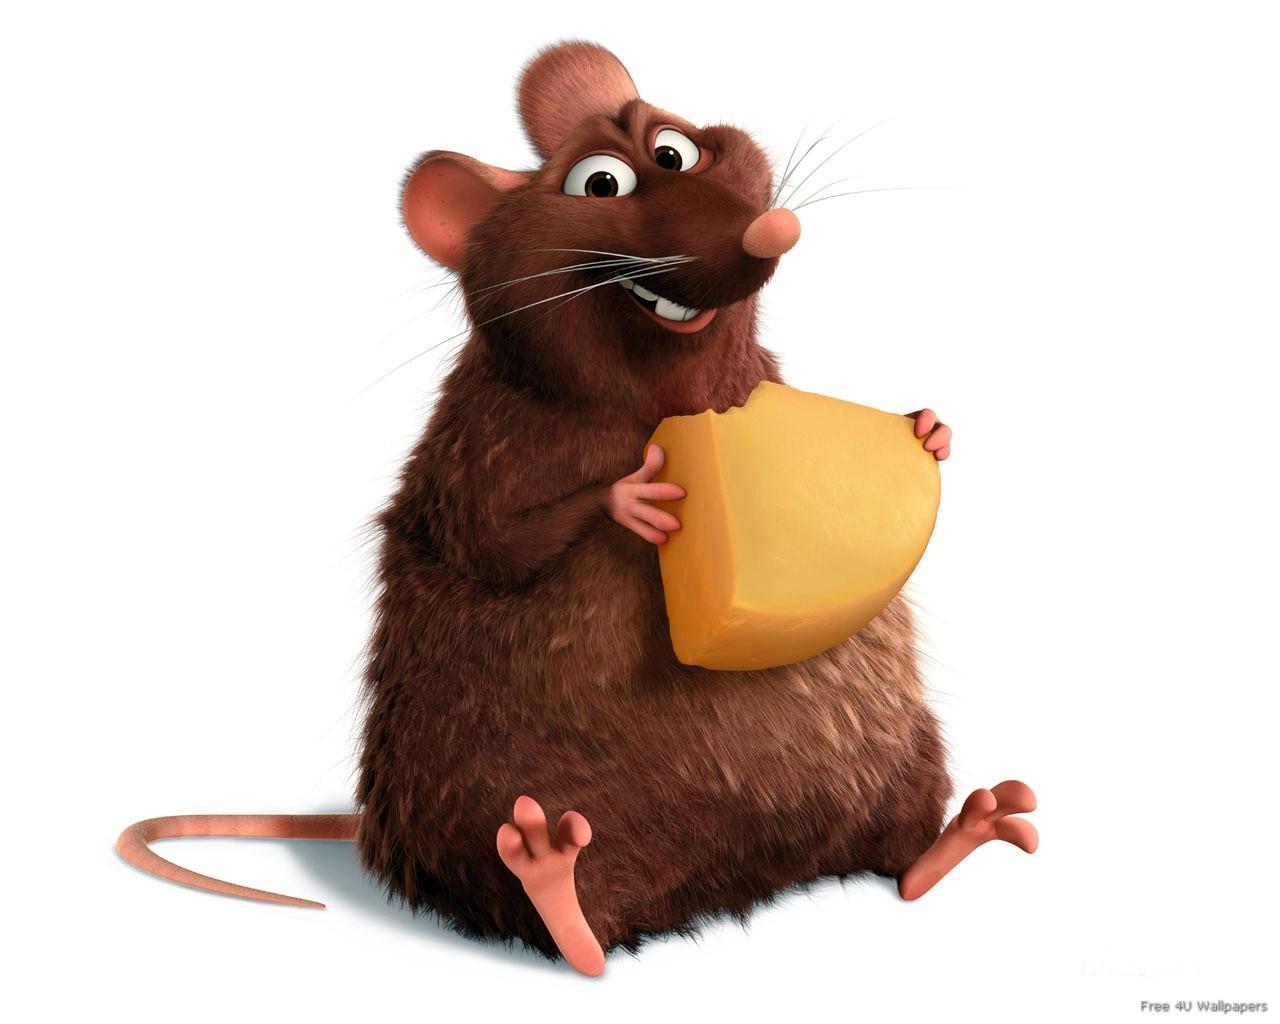 Animated Rats And Mice, Really Cute? Poll Results - Animalation - Fanpop